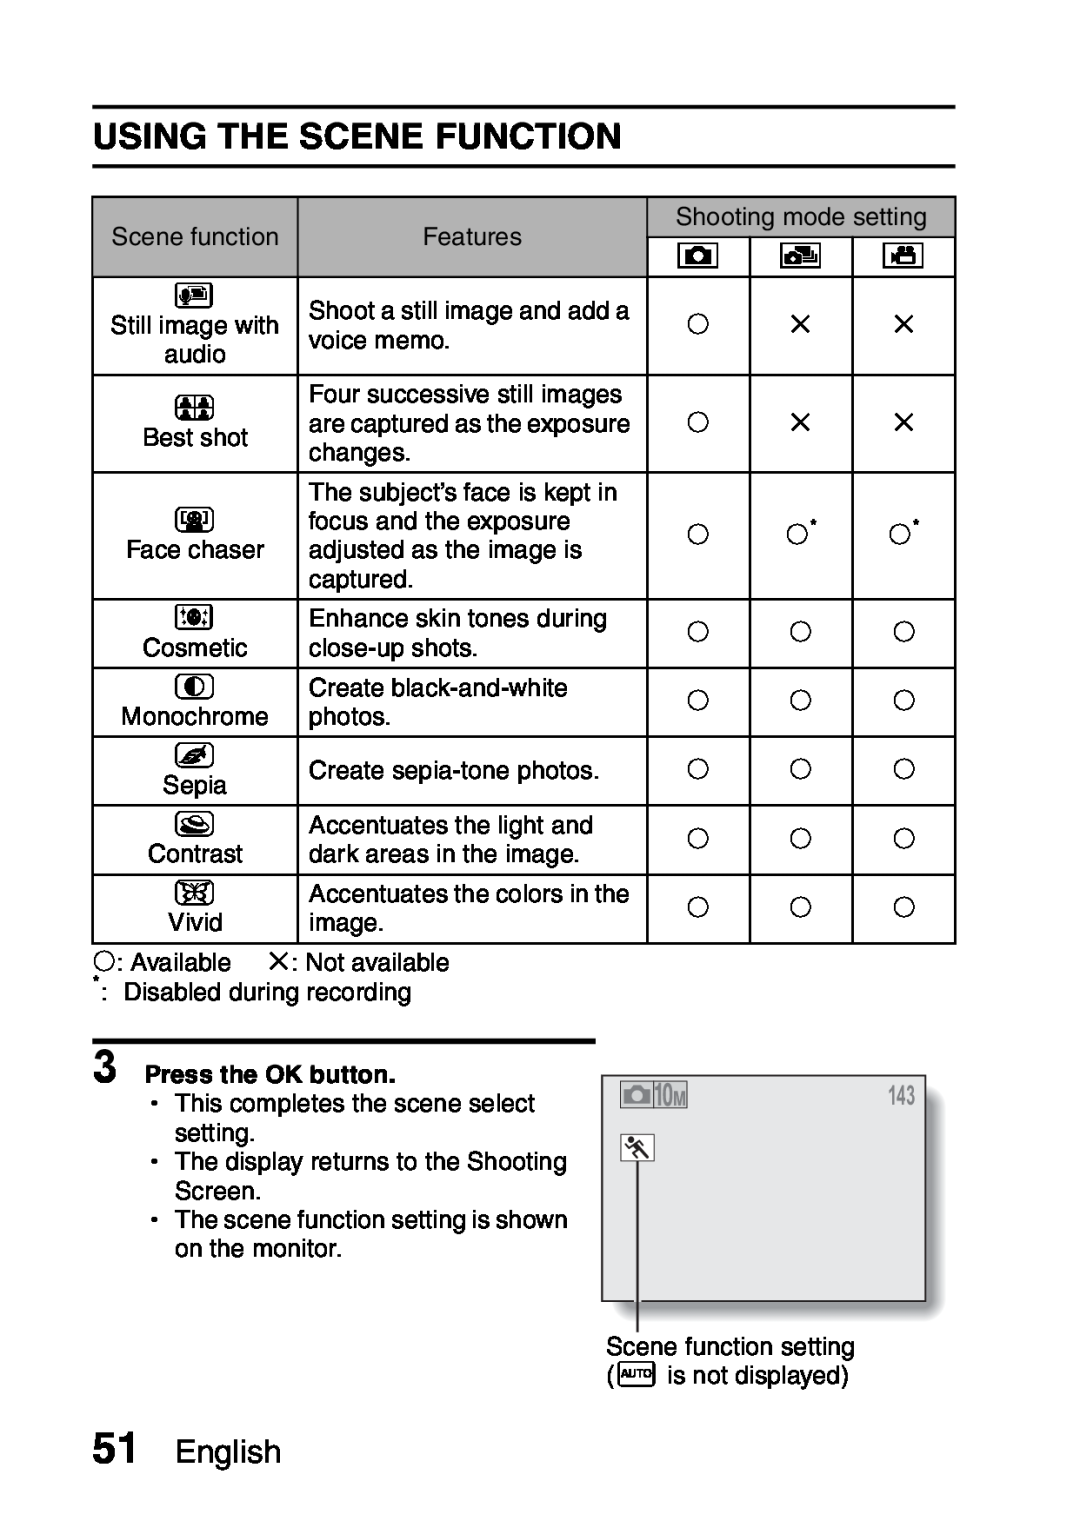 Samsung R50 instruction manual Using The Scene Function, English, Press the OK button 